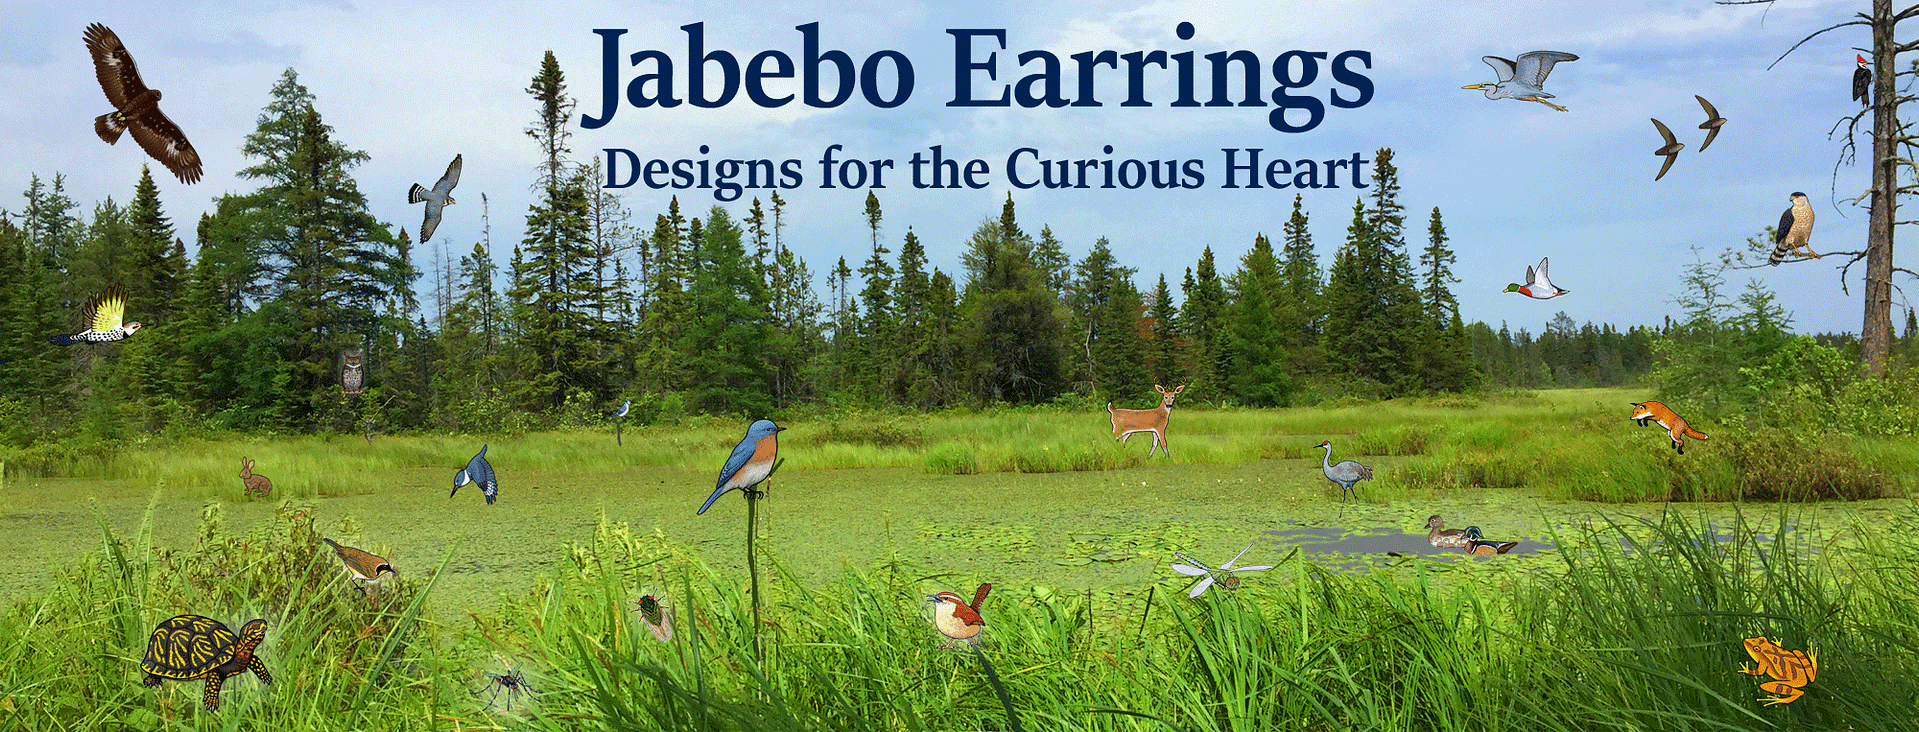 An open field of green grass in the foreground and tall green trees in the background. Blue sky at the top of the image. Jabebo Earrings Designs for the Curious Heart is the title at the top of the image. Various images of earrings sold at the store are featured throughout the image.